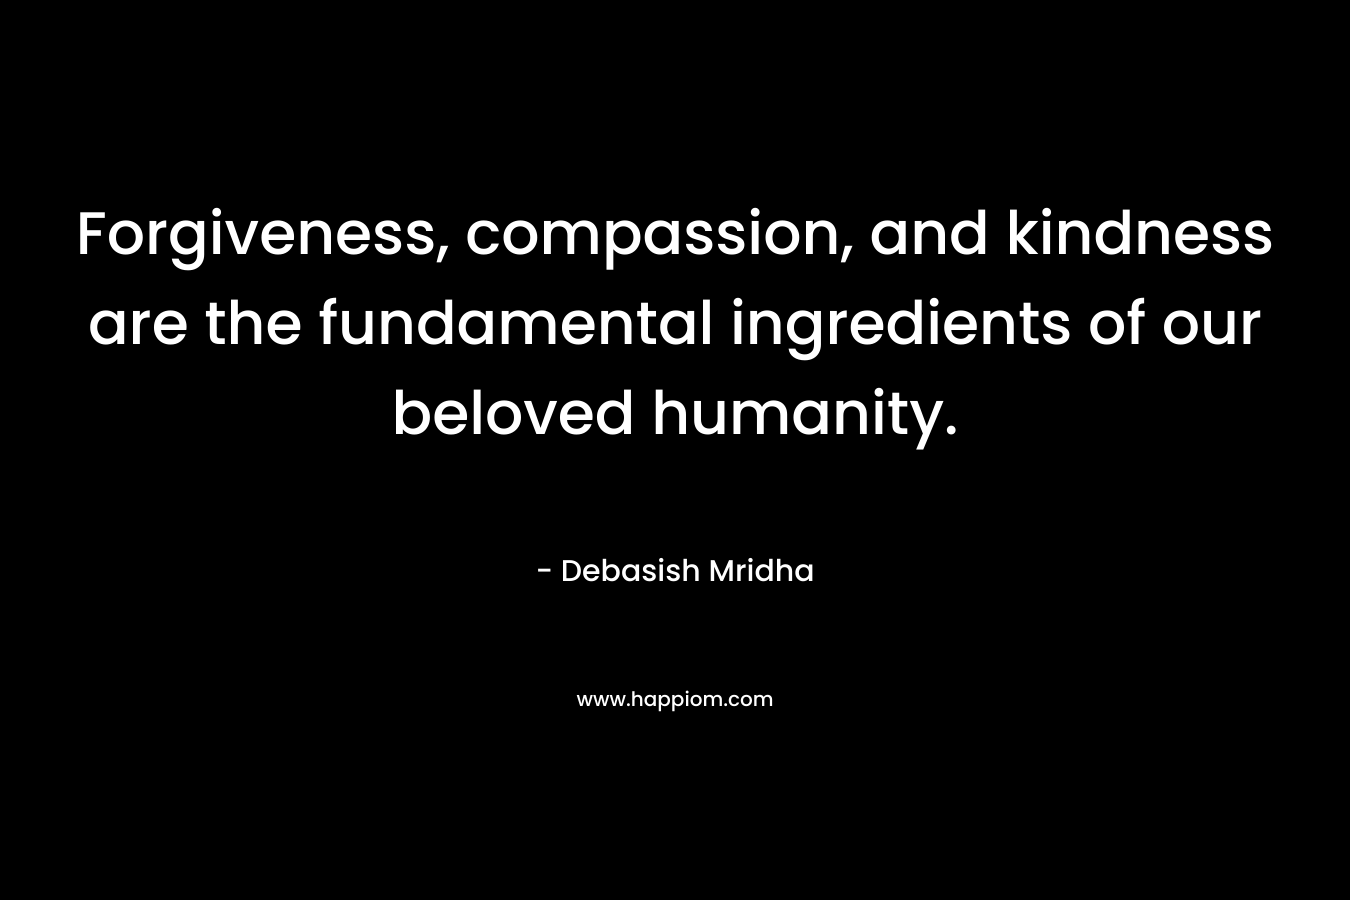 Forgiveness, compassion, and kindness are the fundamental ingredients of our beloved humanity. – Debasish Mridha